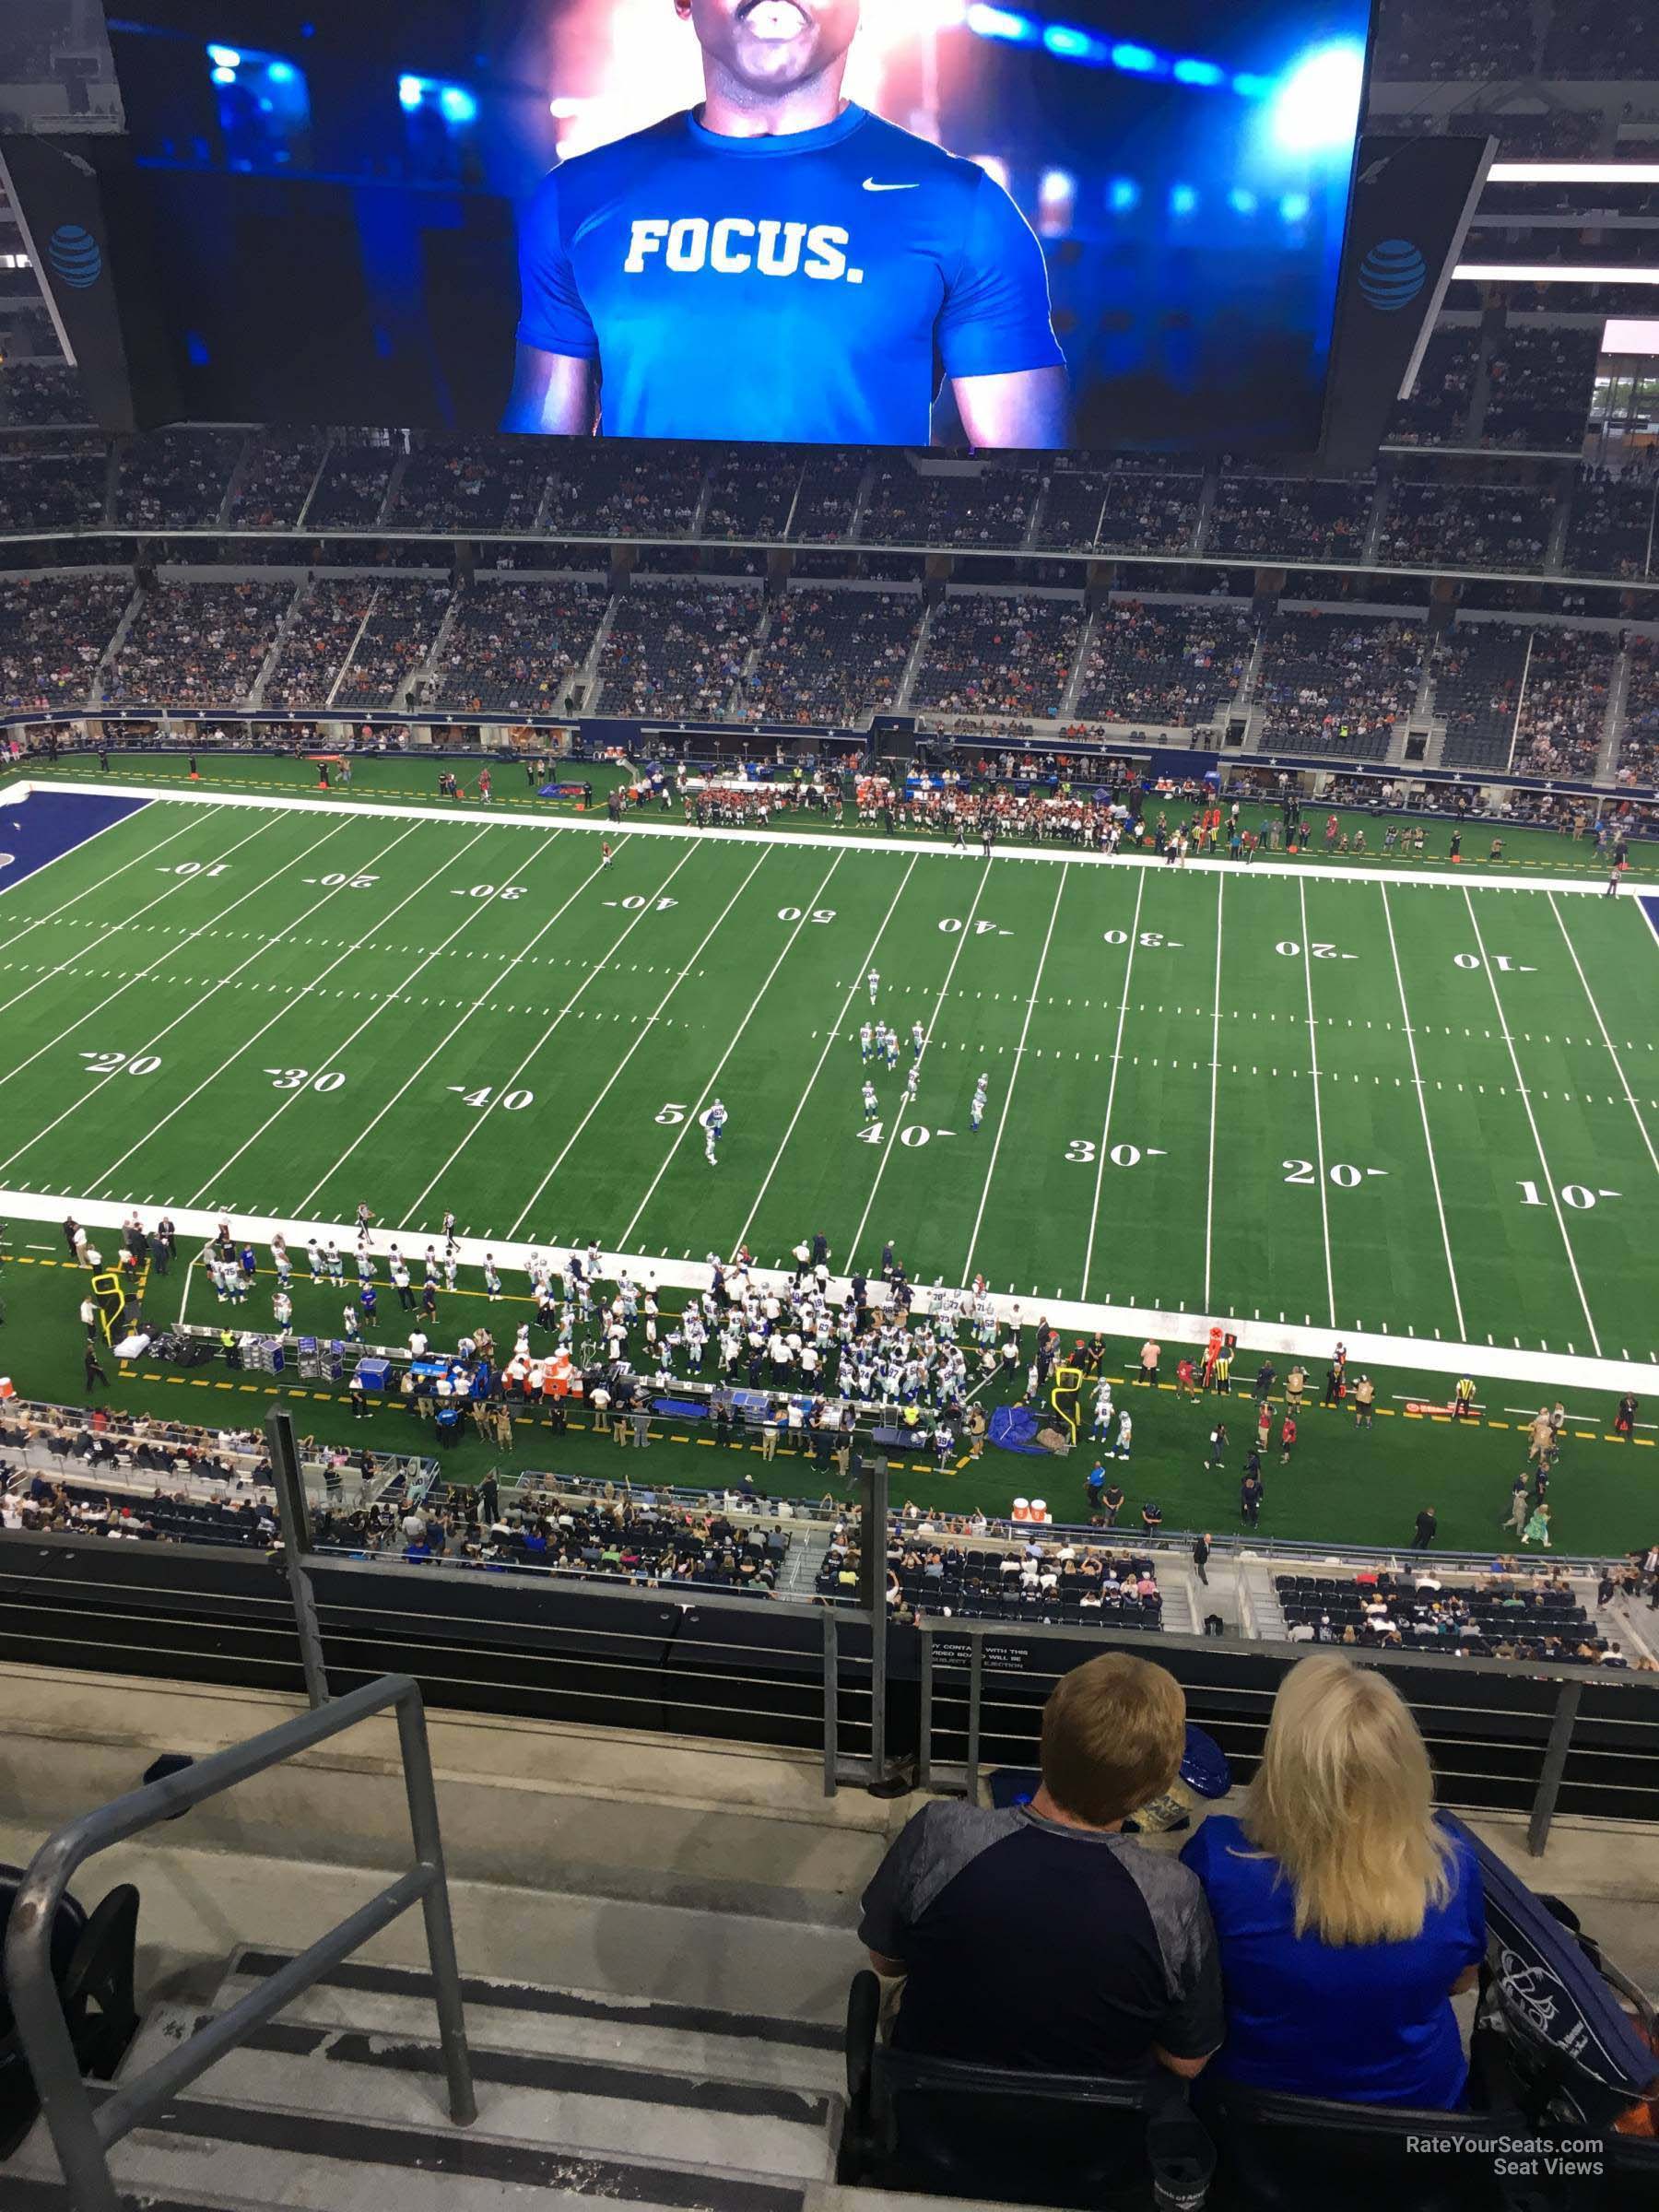 section 409, row 4 seat view  for football - at&t stadium (cowboys stadium)